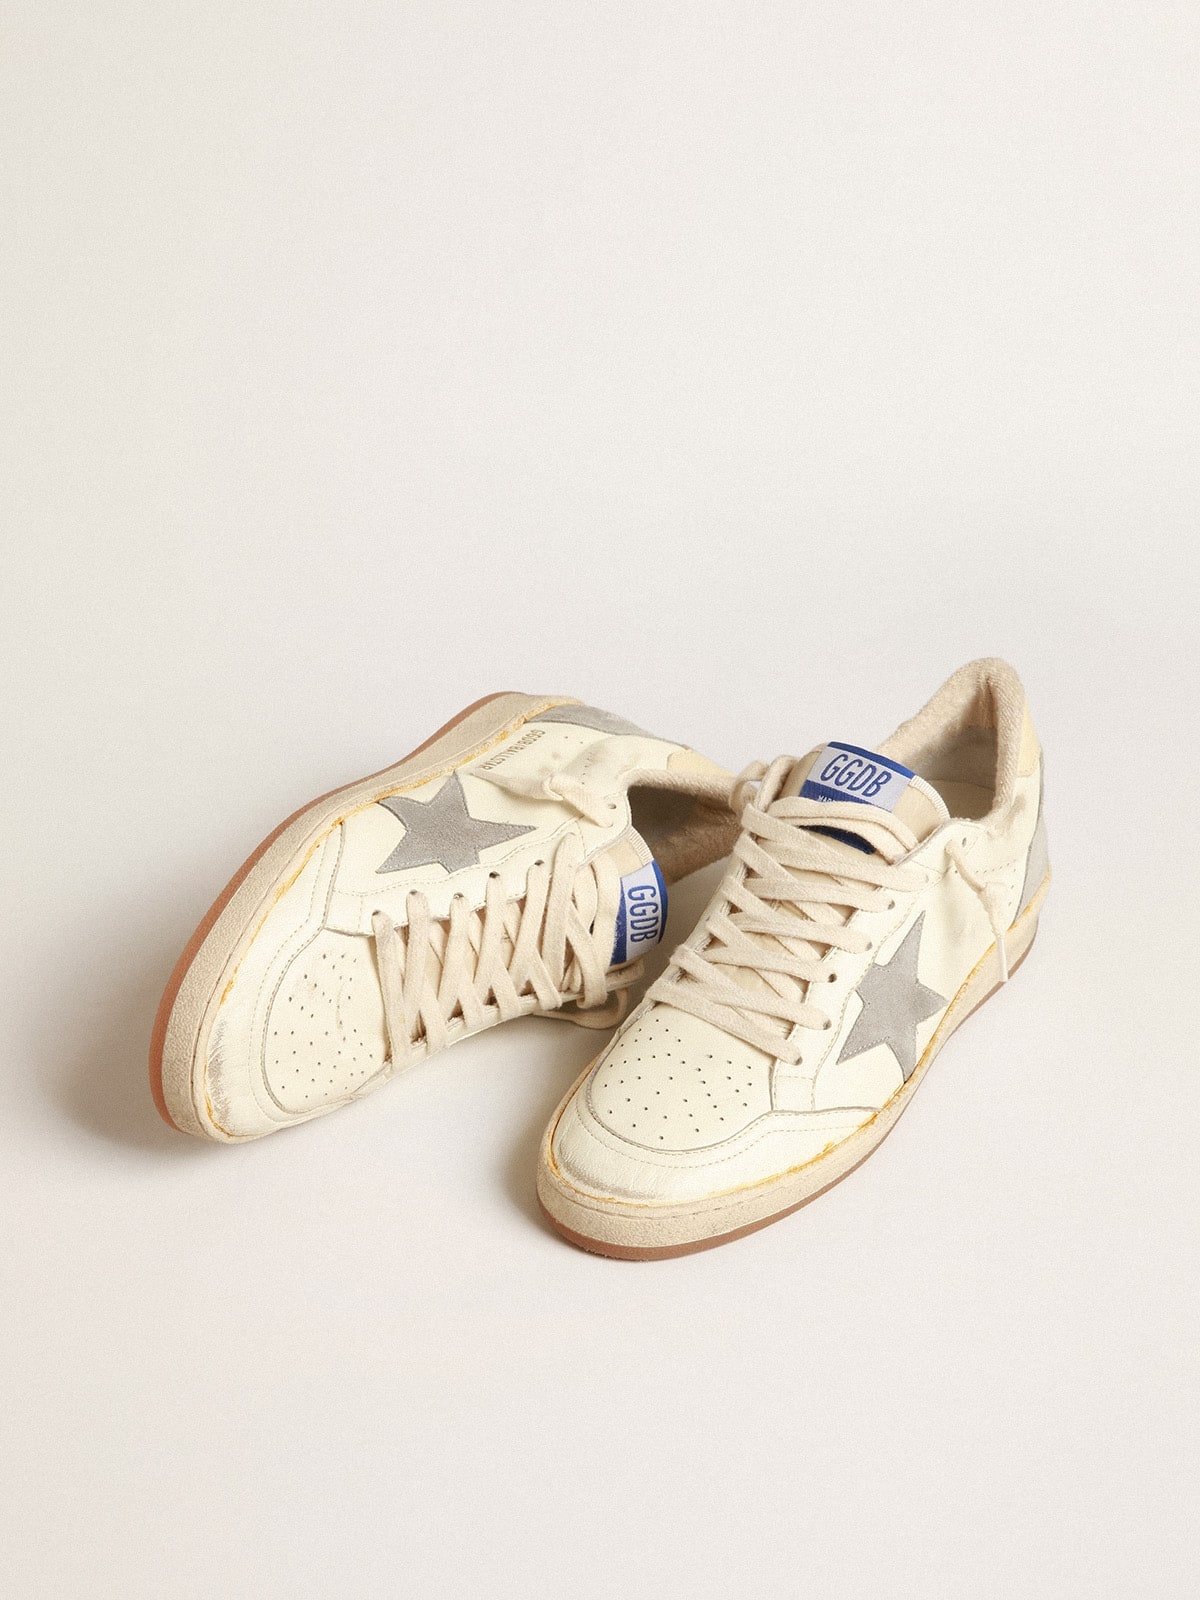 Ball Star in nappa leather with gray suede star and beige heel tab - 2